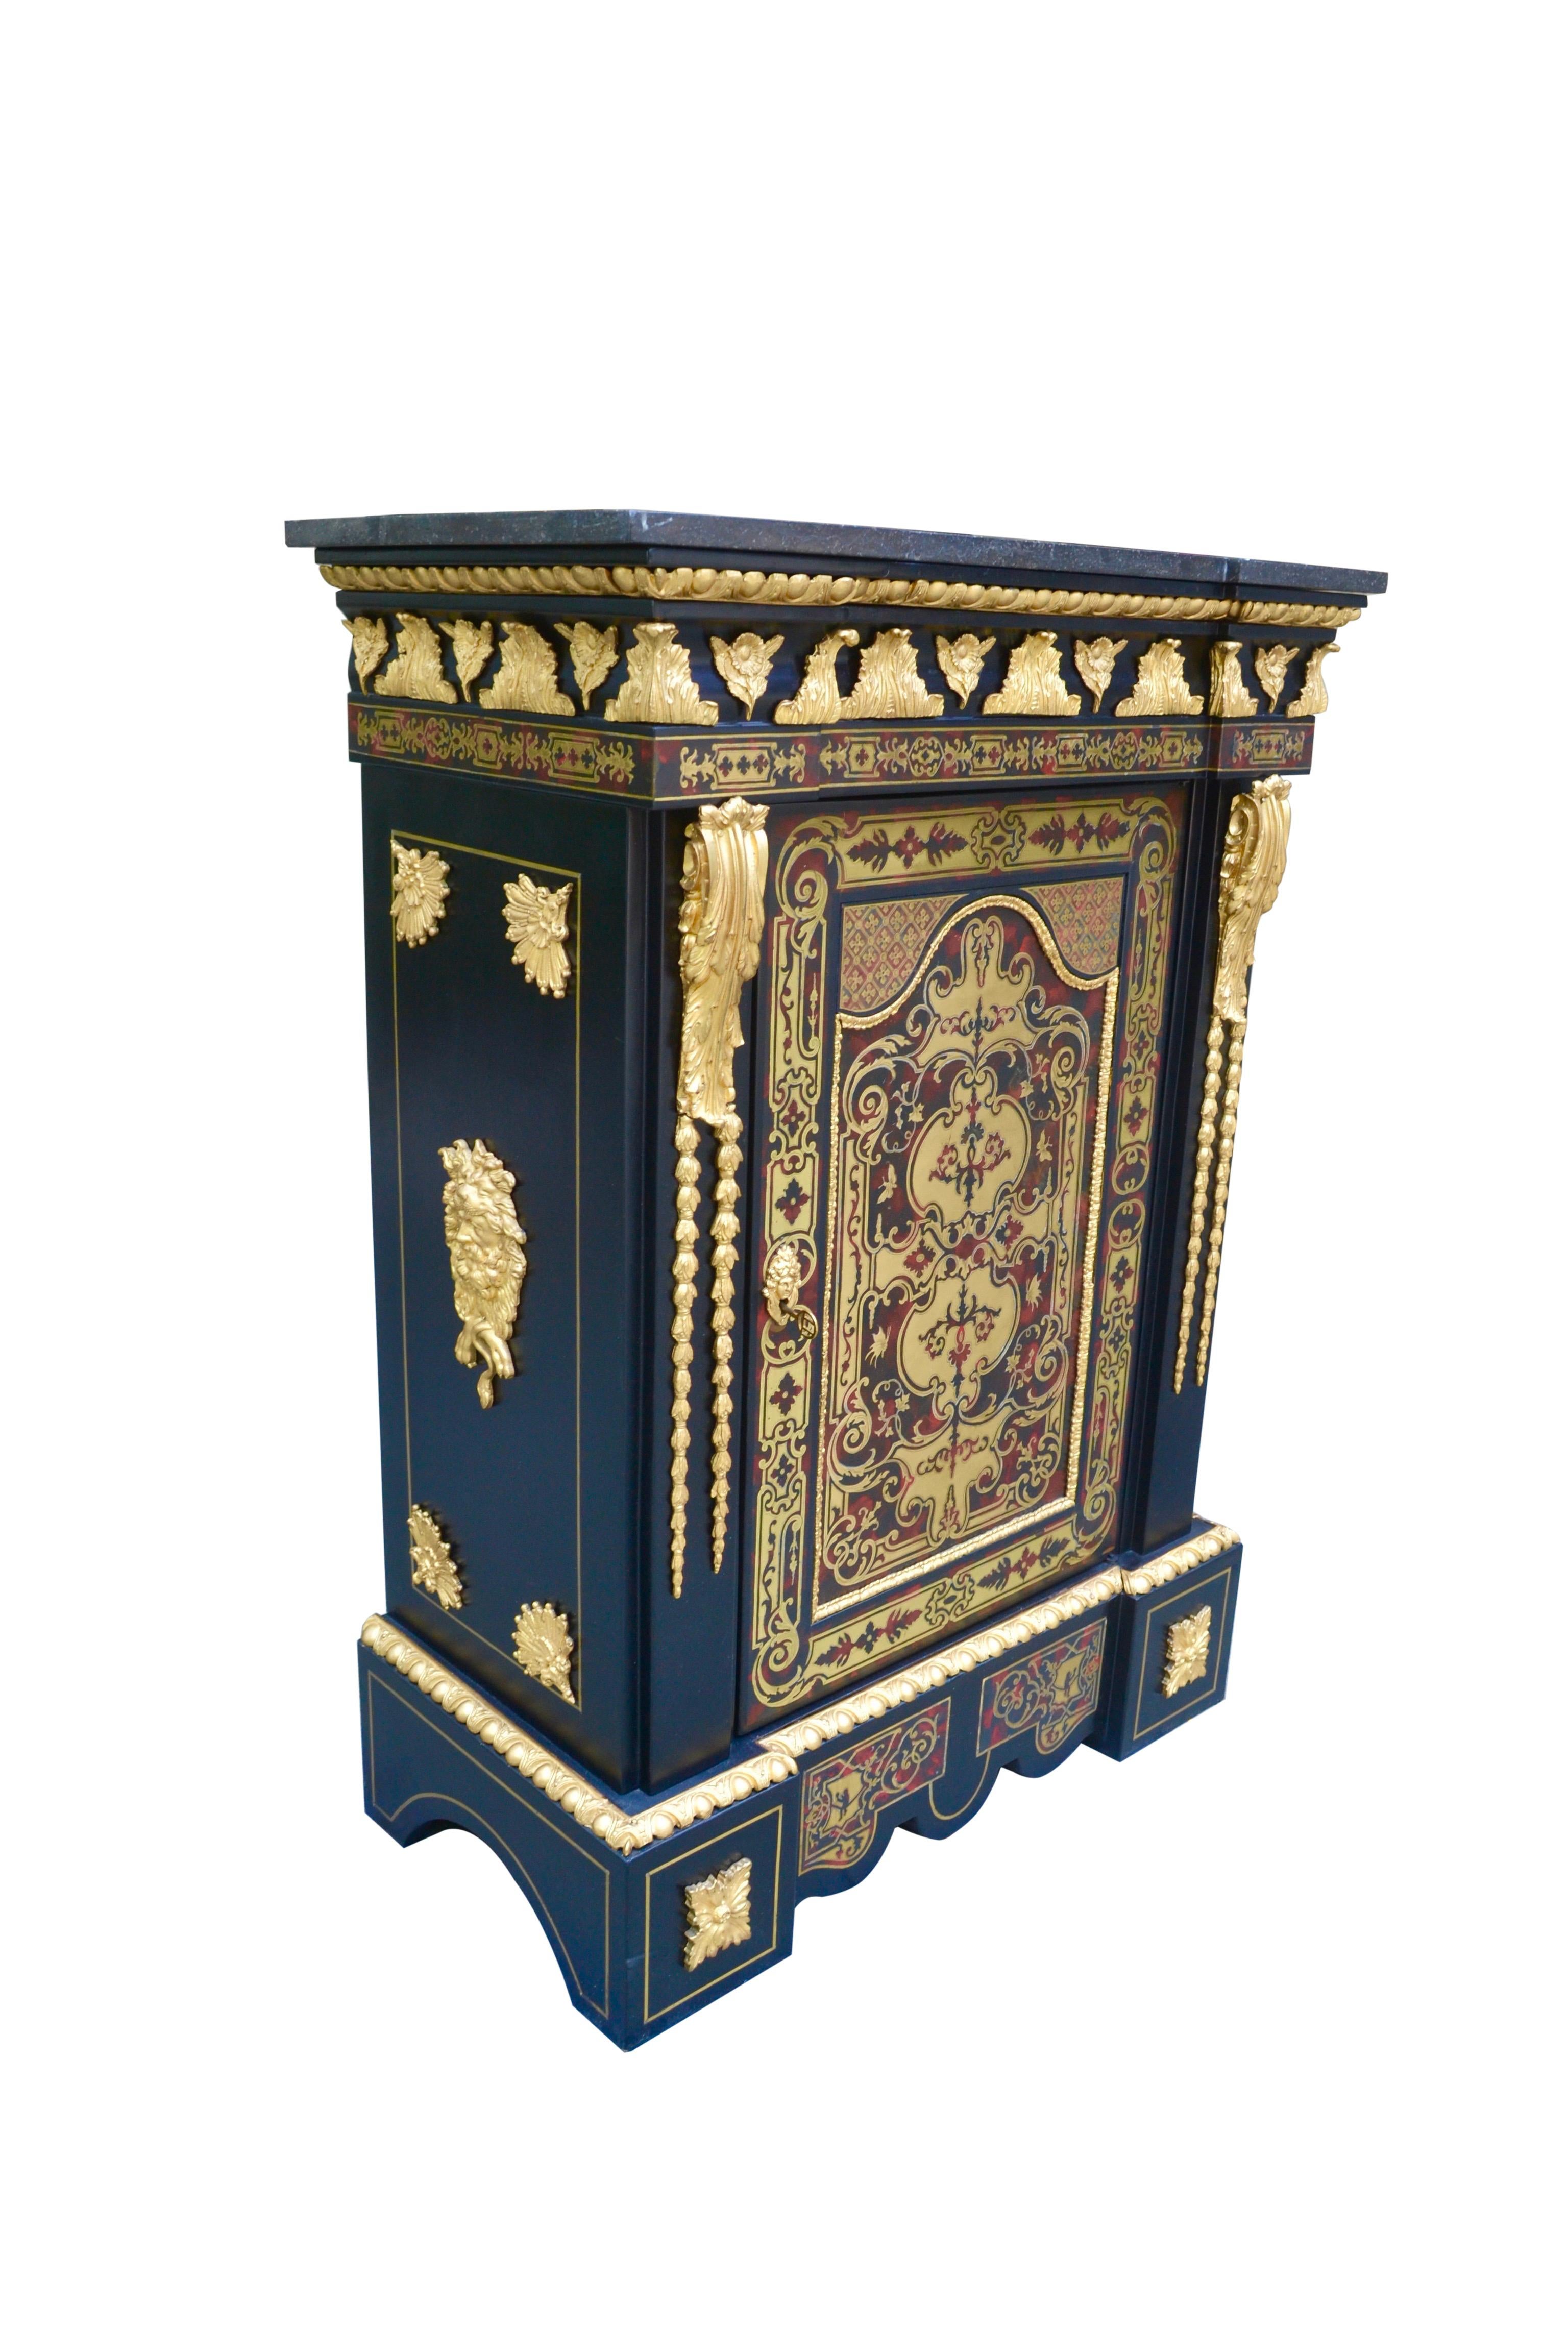 A very fine quality French cabinet referred to as a Meuble d'Appui. The piece was made in Paris during the reign of Napoleon III circa 1870. The ebonized cabinet is inlaid with brass and has all-over lavish gilded bronze mounts and mouldings. The